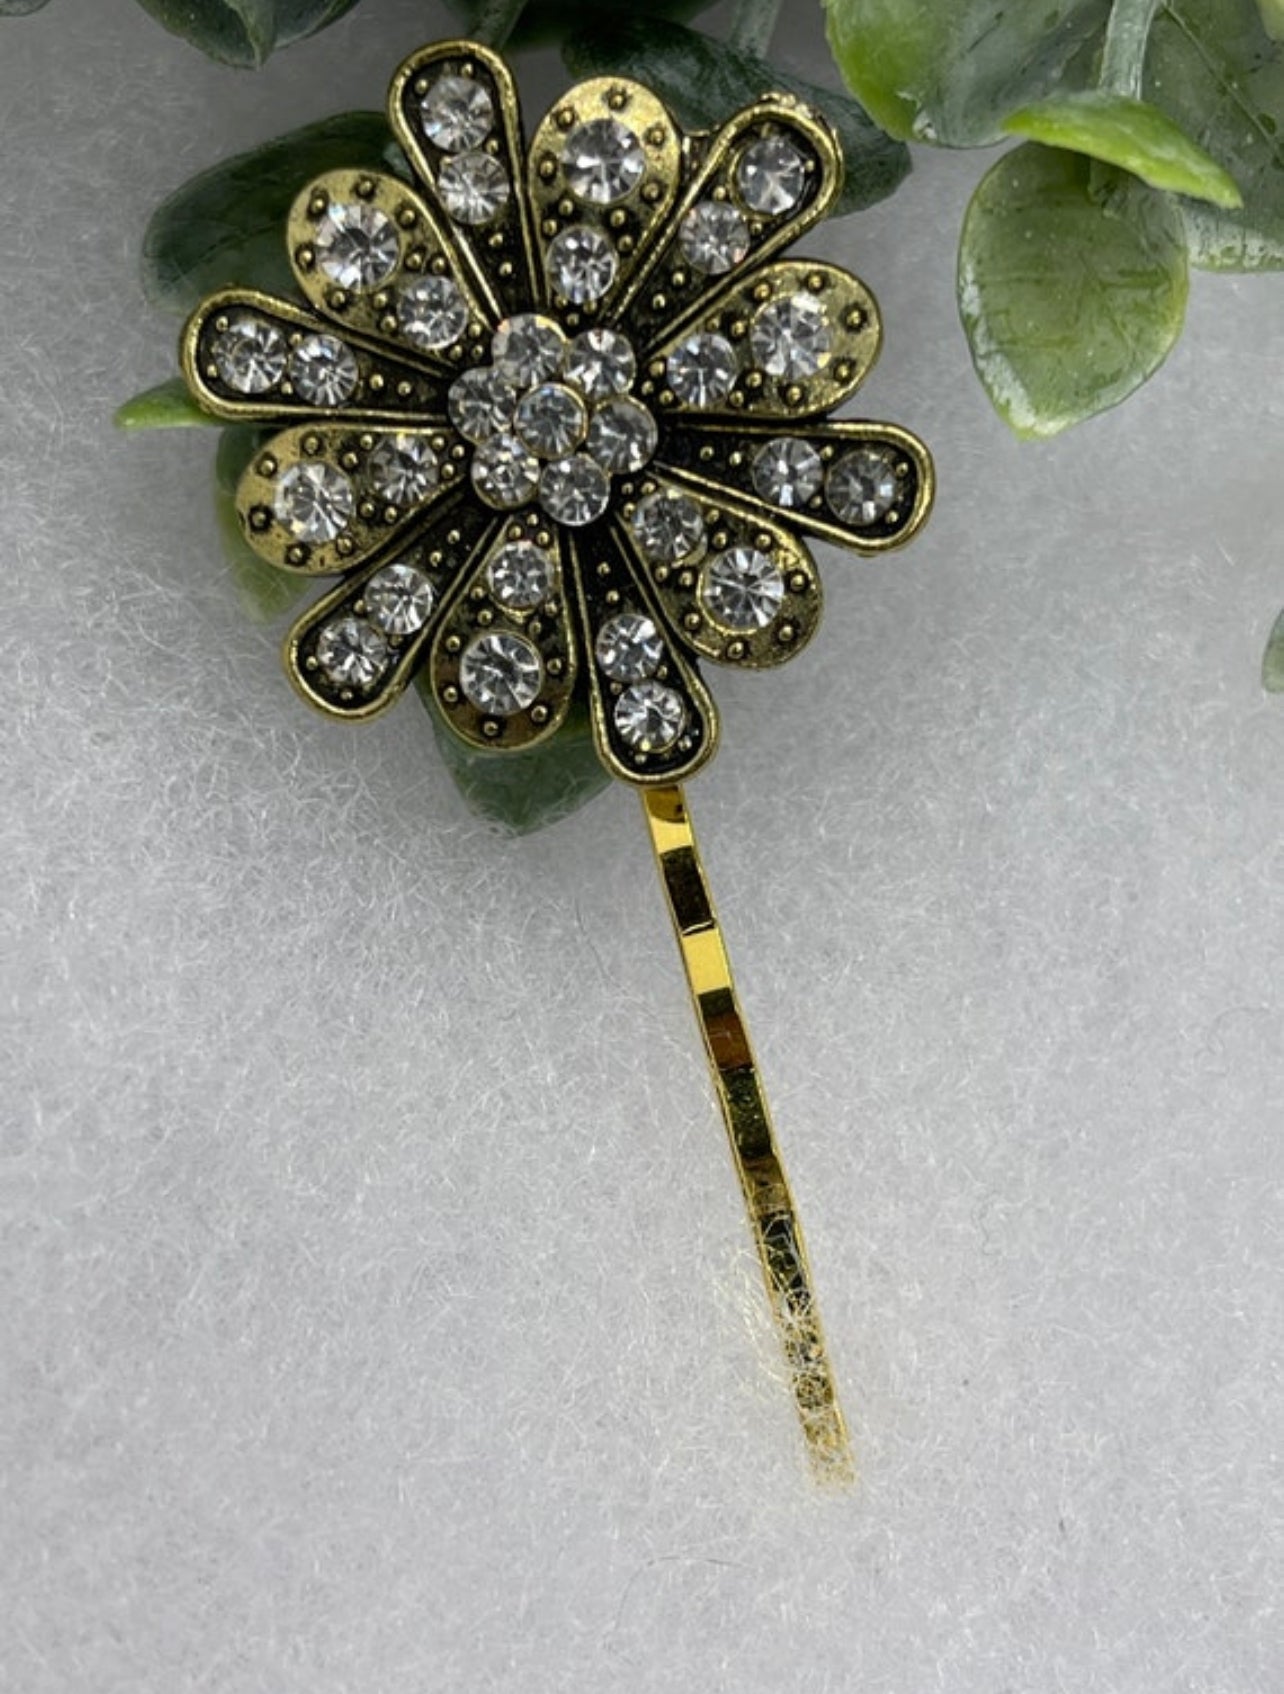 Gold crystal vintage antique style hair pin approximately 2.5” long Handmade hair accessory bridal wedding Retro